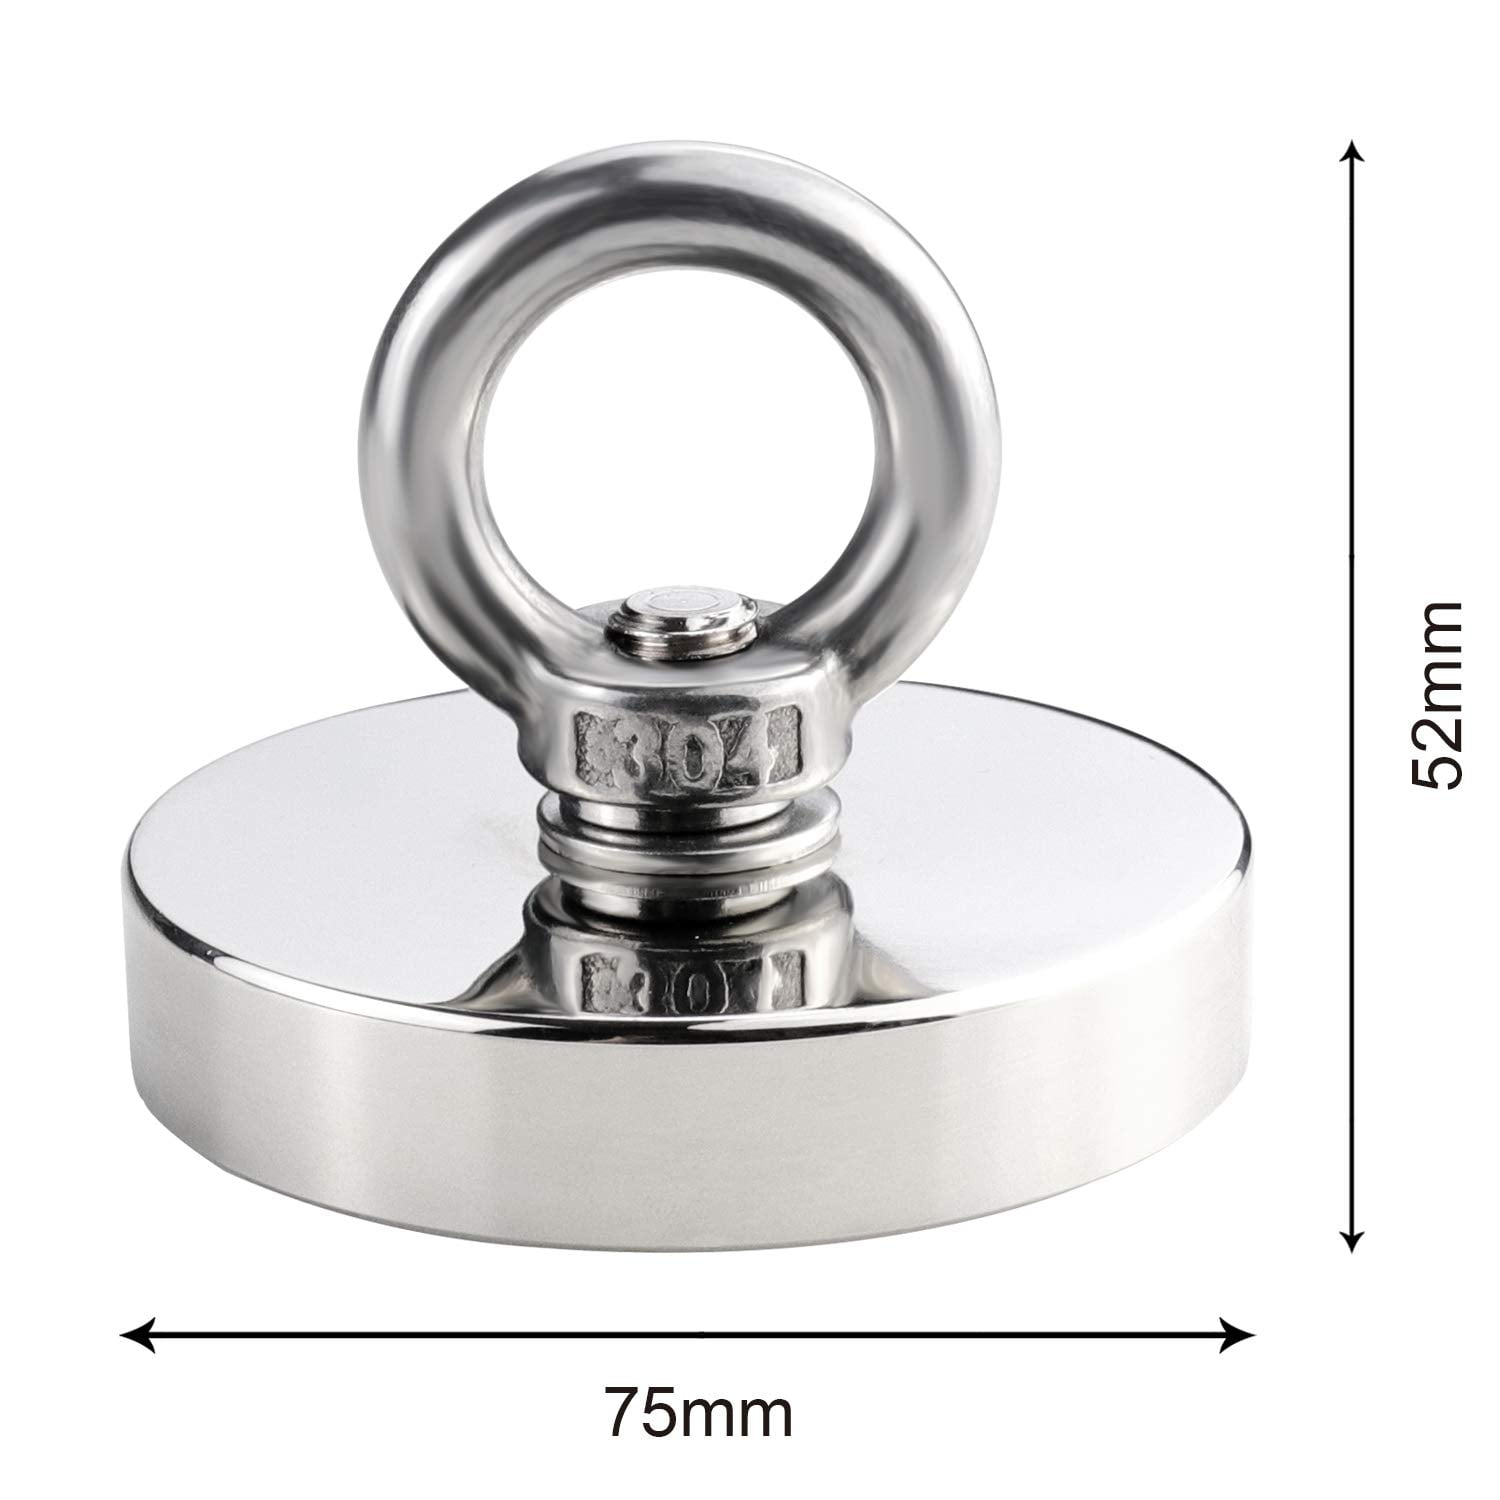 DIYMAG Strong Neodymium Fishing Magnets, 150 lbs(68 KG) Pulling Force Rare  Earth Magnet with Countersunk Hole Eyebolt Diameter 1.41 inch(36 mm) for  Retrieving in River and Magnetic Fishing 